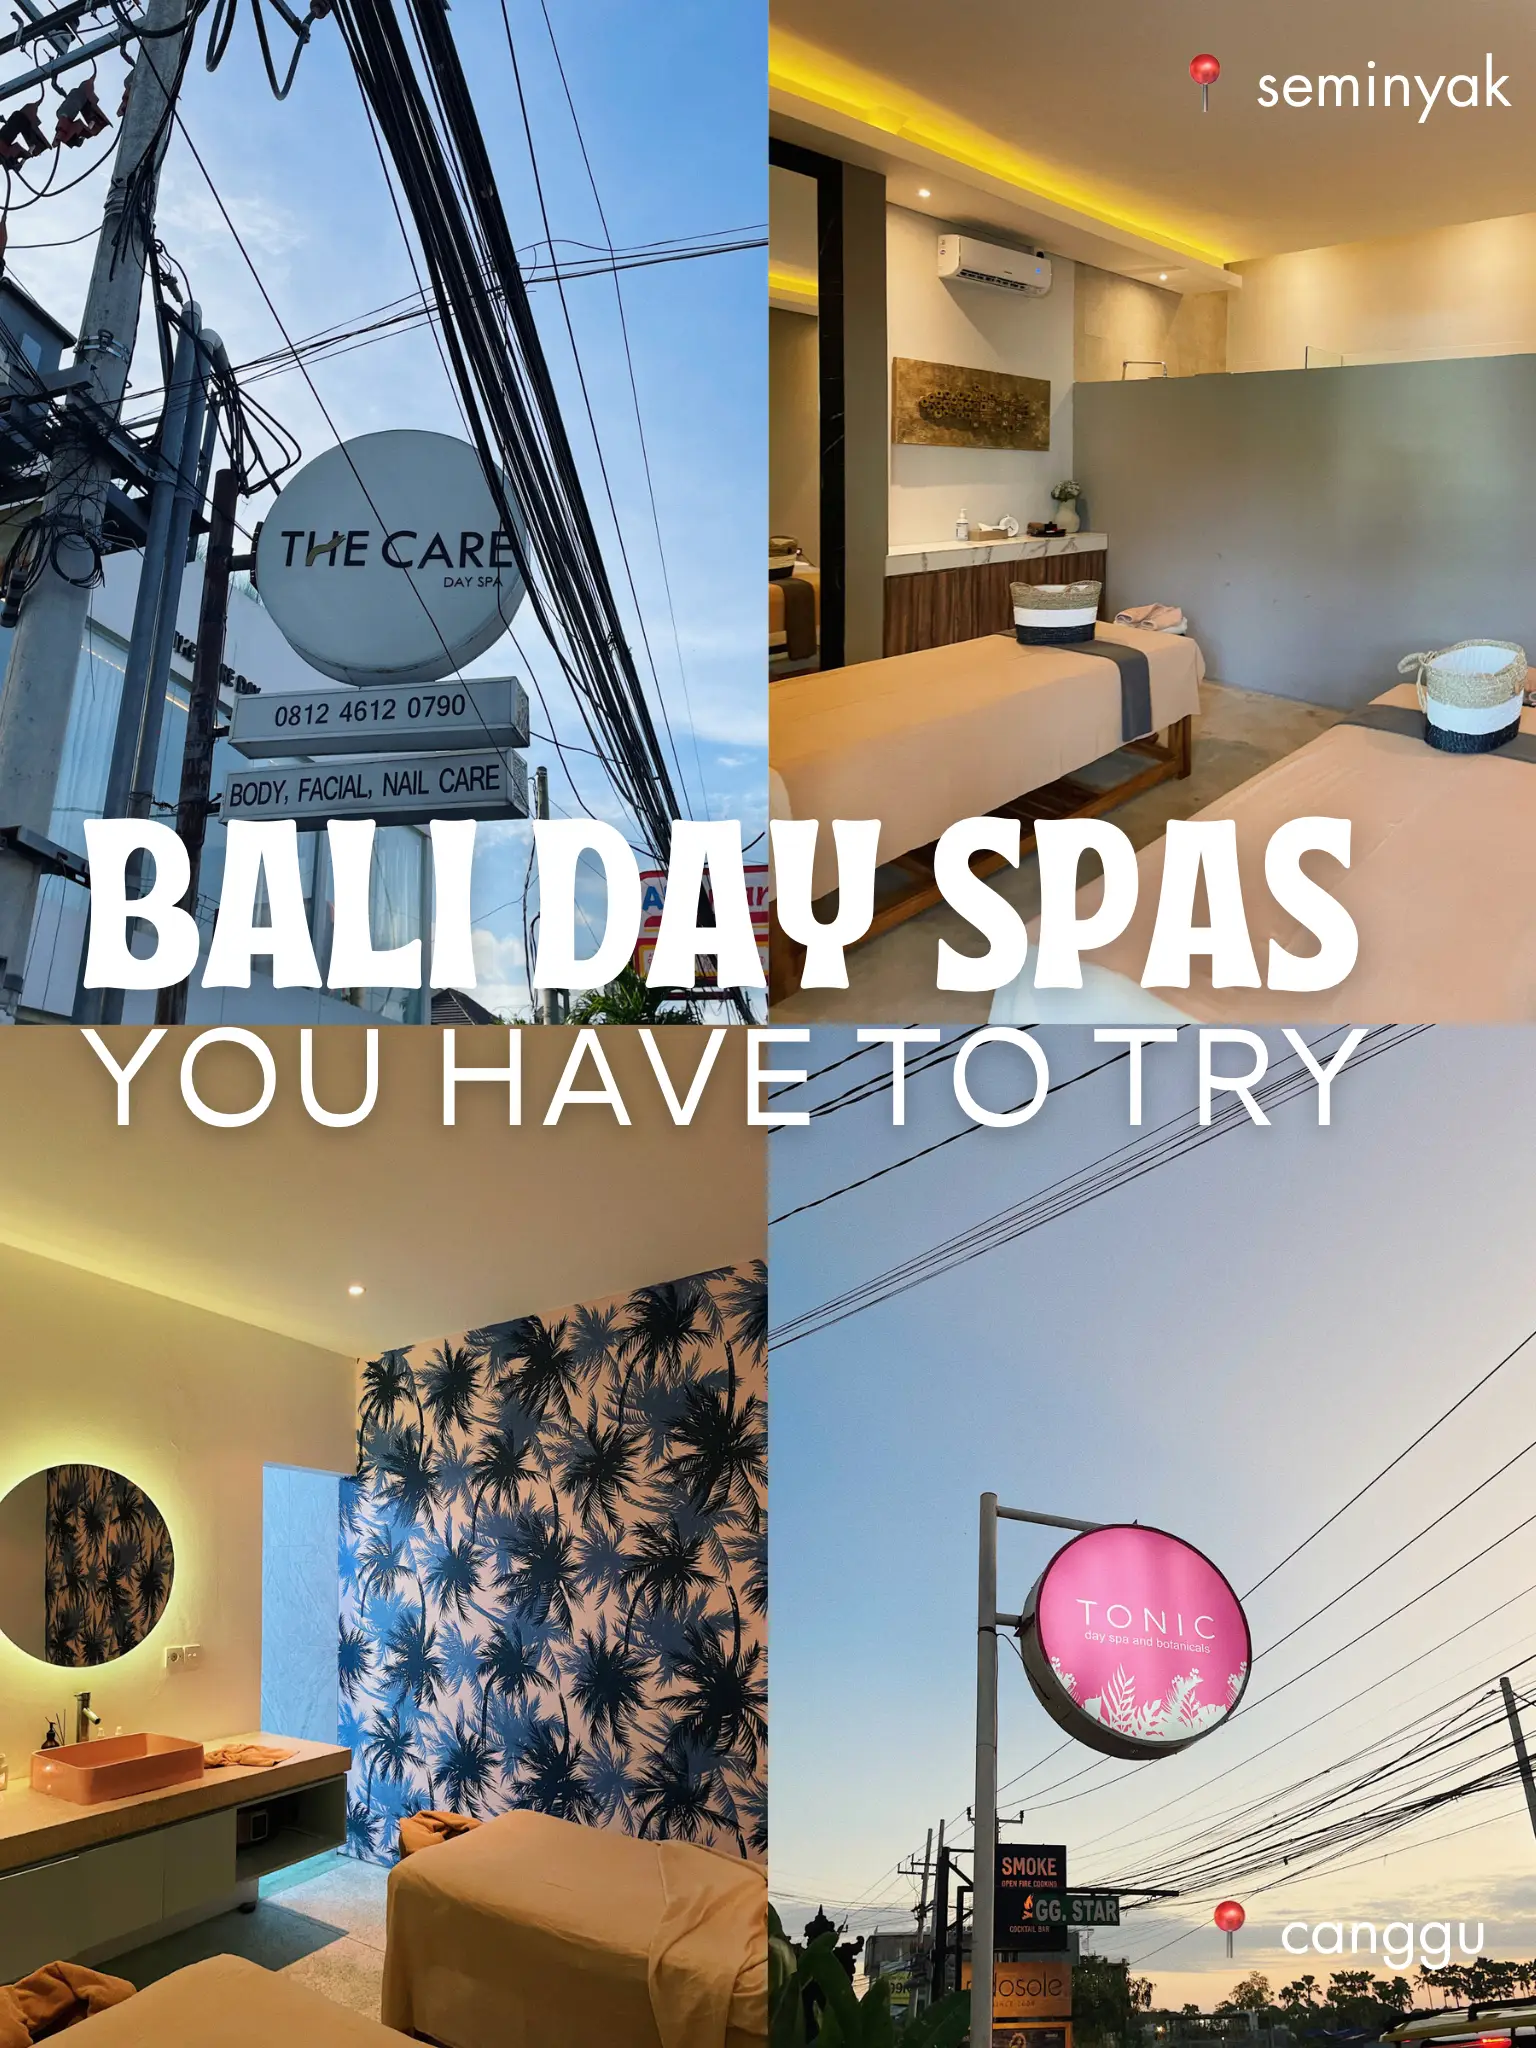 rating CHEAP & AESTHETIC spas in Bali's images(0)